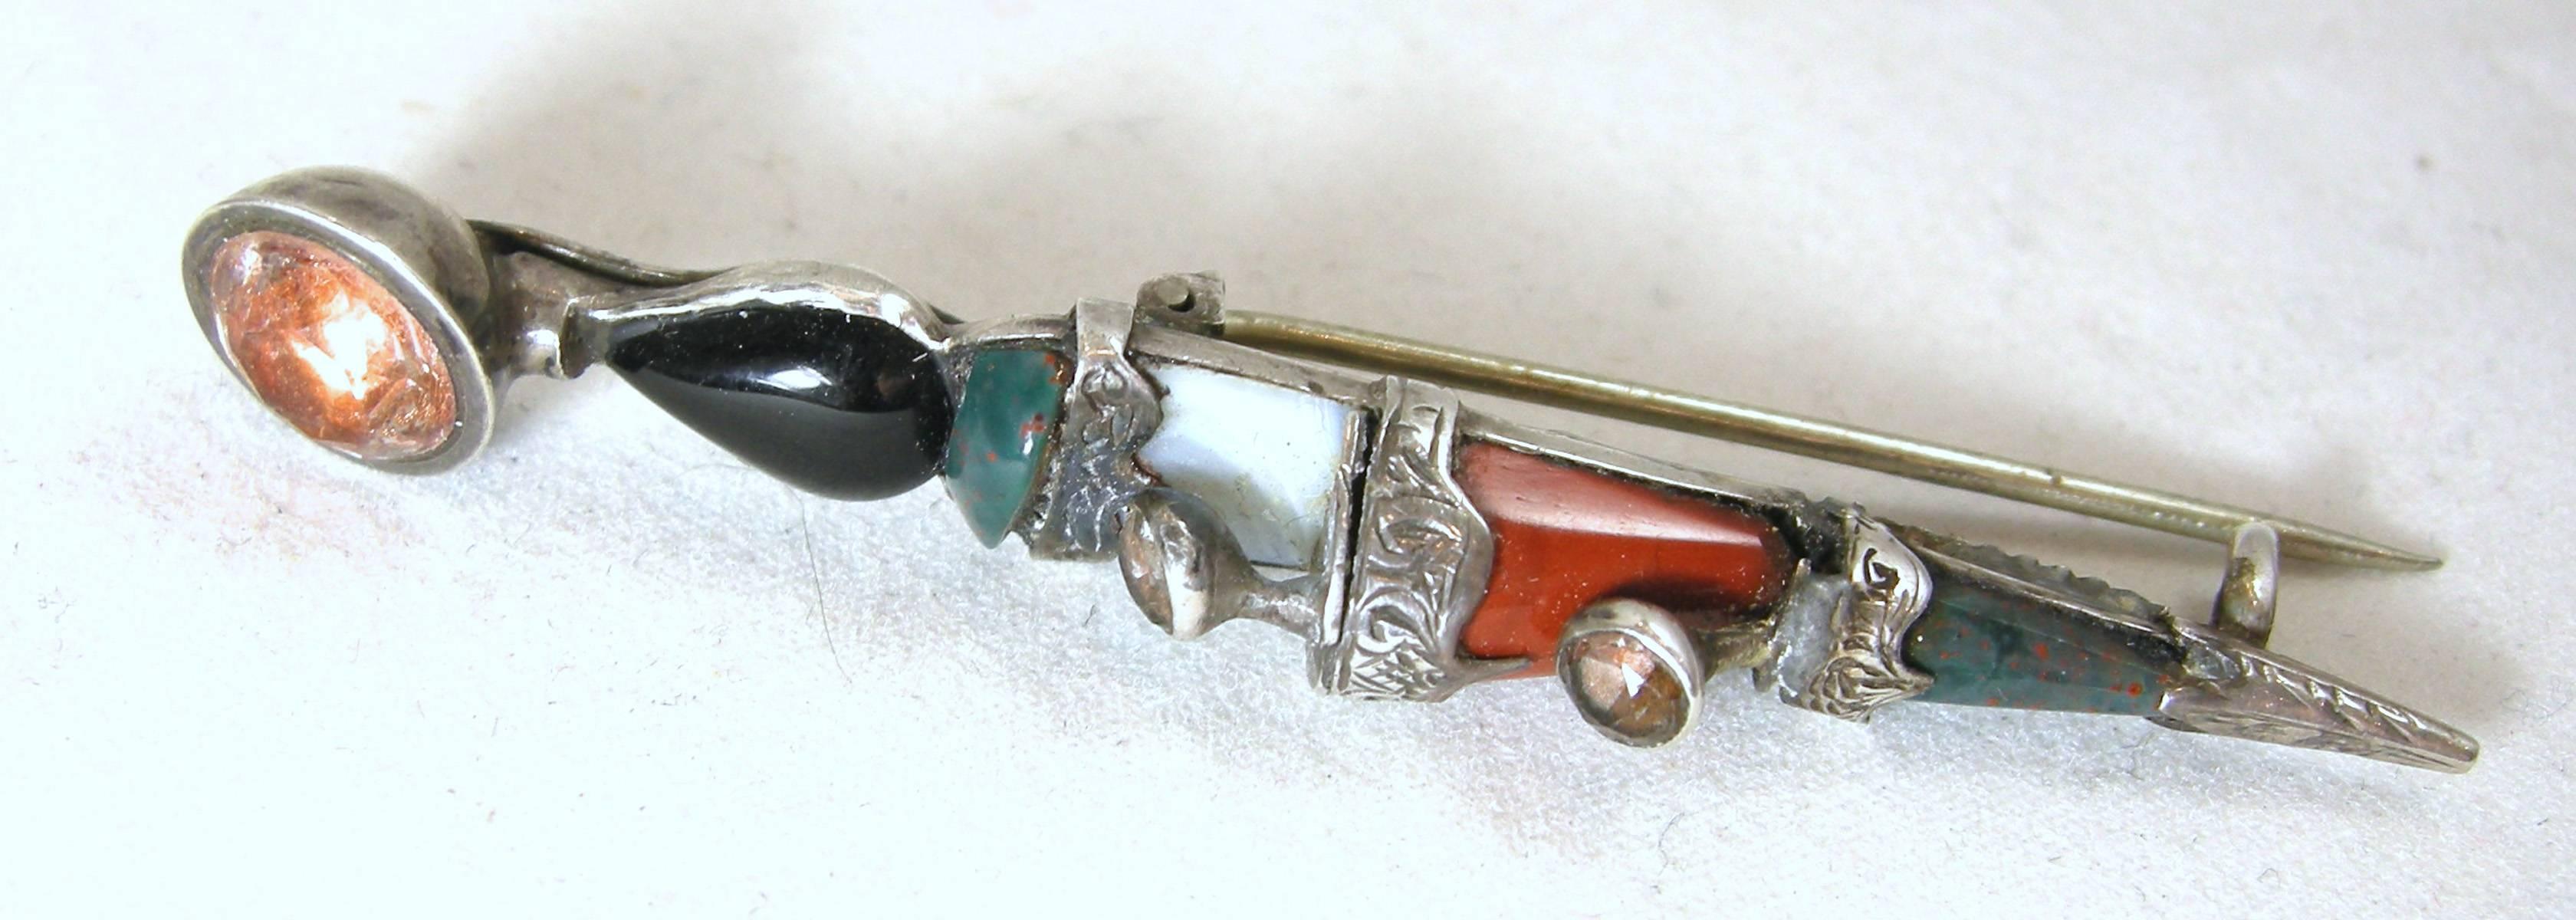 This is a great Scottish scepter/sword sterling silver pin from the 1880s.  It is elongated and most likely used for the kilt.  The top has a citrine gemstone, then onyx followed by different color agates leading to the bottom.  It measures 2-1/2”